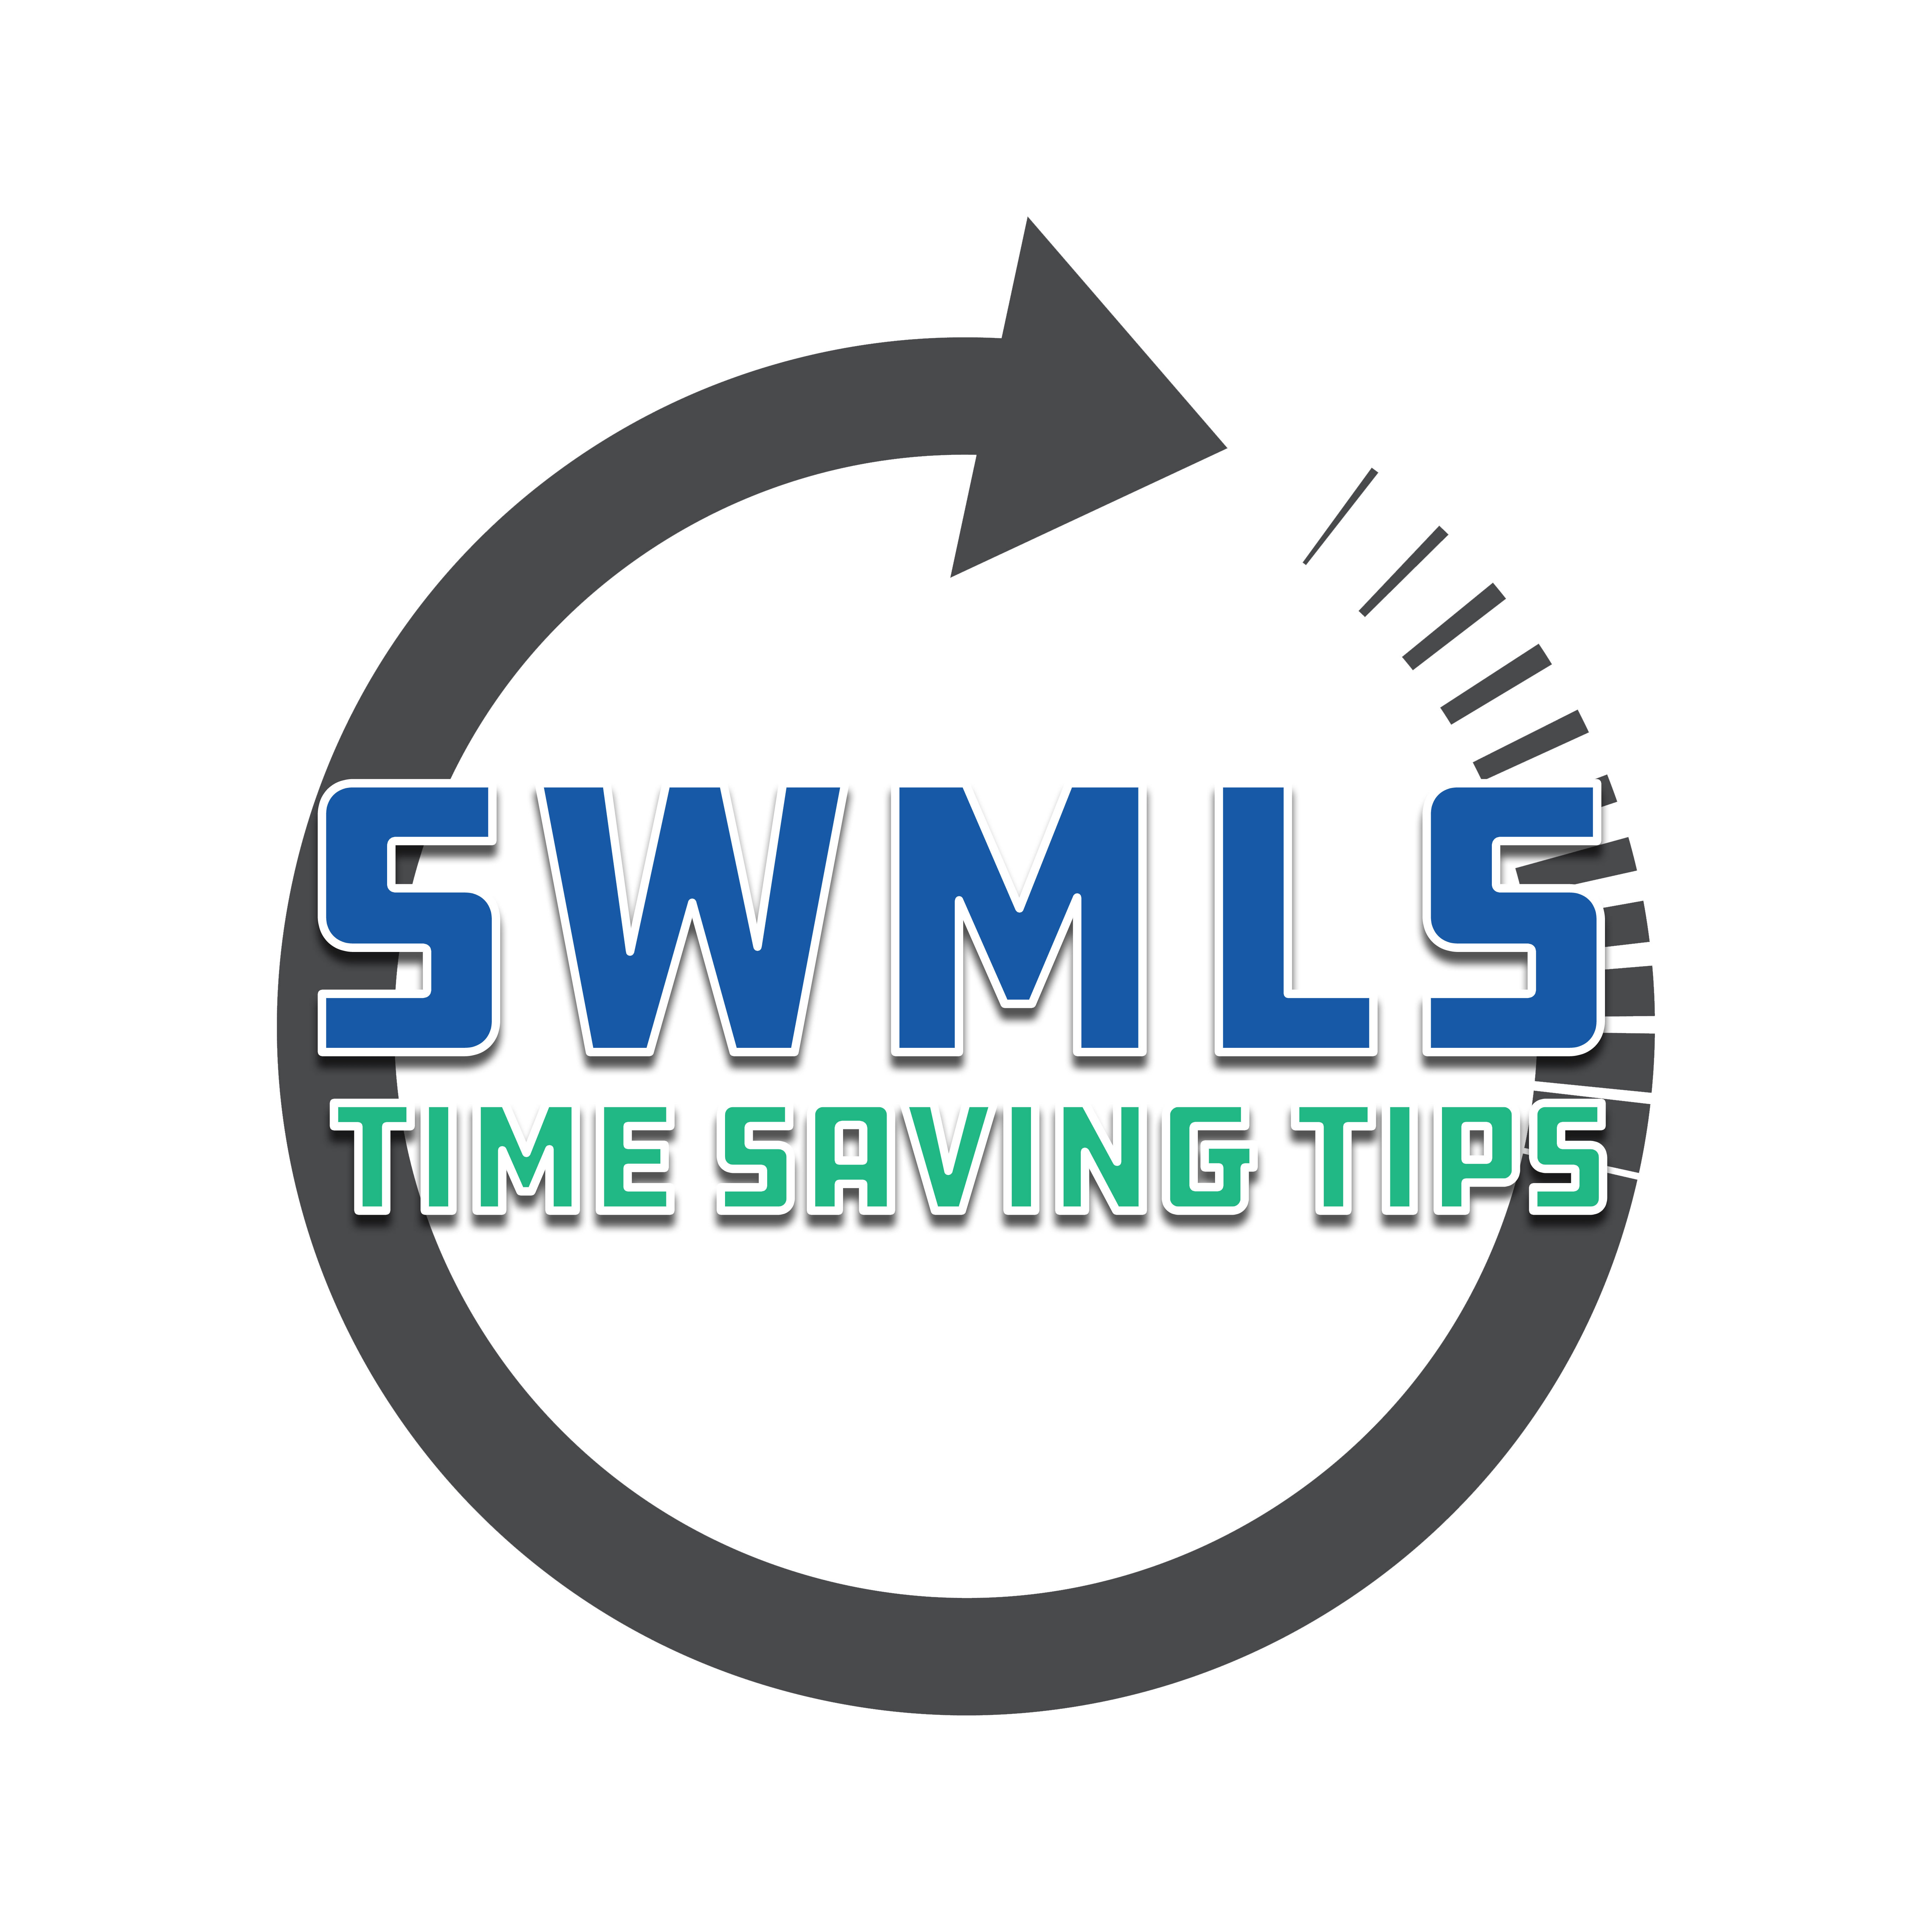 SWMLS Tip: Update Your Client’s Saved Search